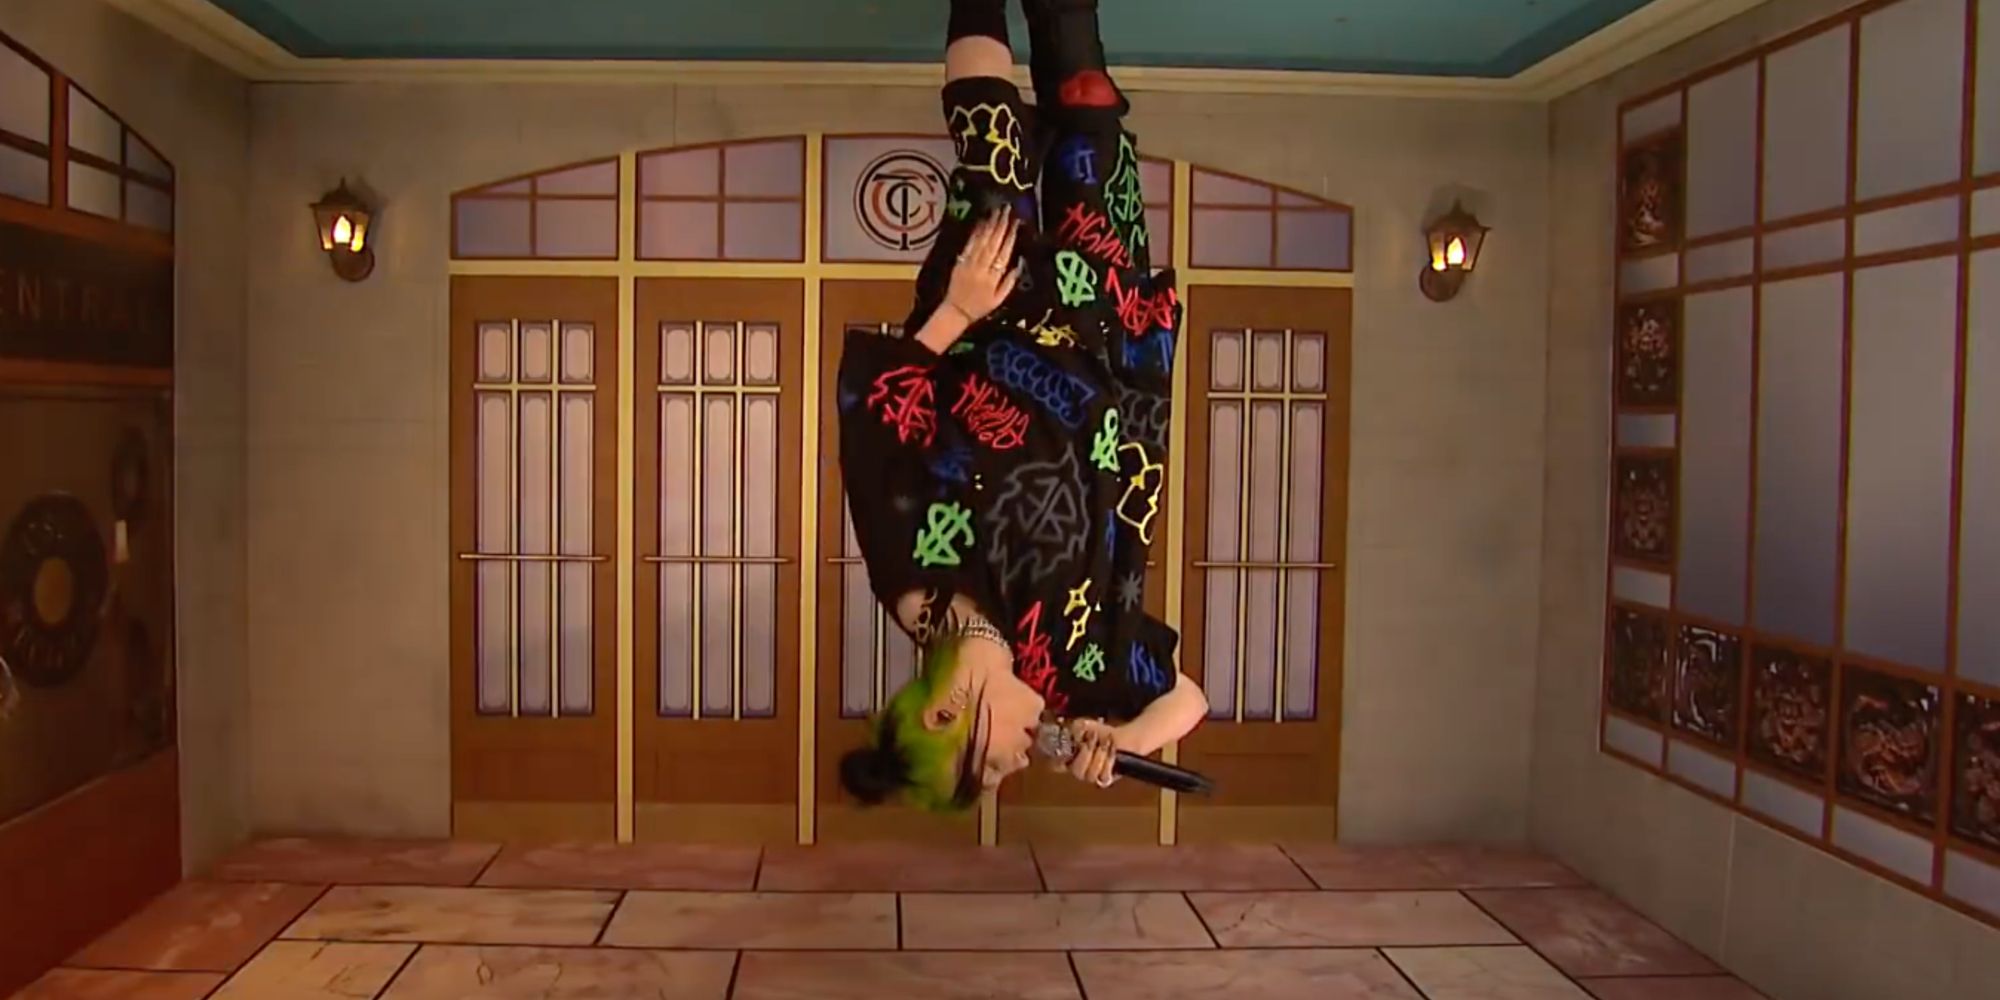 Billie Eilish performing "Bad Guy" while appearing upside-down on SNL in 2019